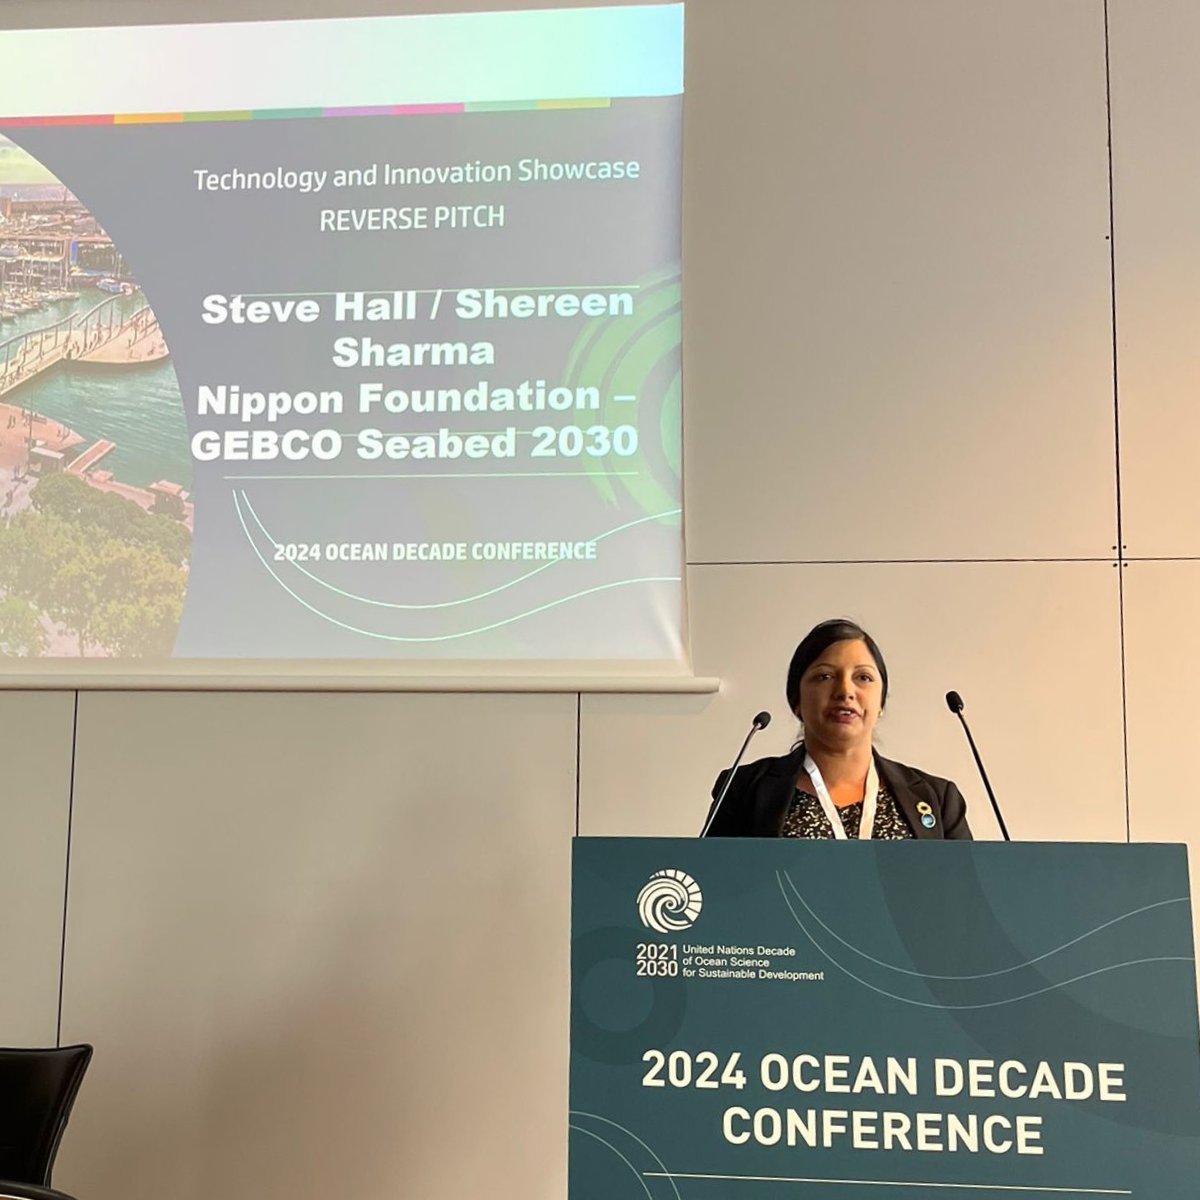 🇪🇸 Recent insights from the @UNOceanDecade Conference! @ShereenSharma1, our Head of Engagement and Development, shared a compelling three-minute 'reverse pitch' to investors and technologists, advocating for innovative strides in #oceanmapping.